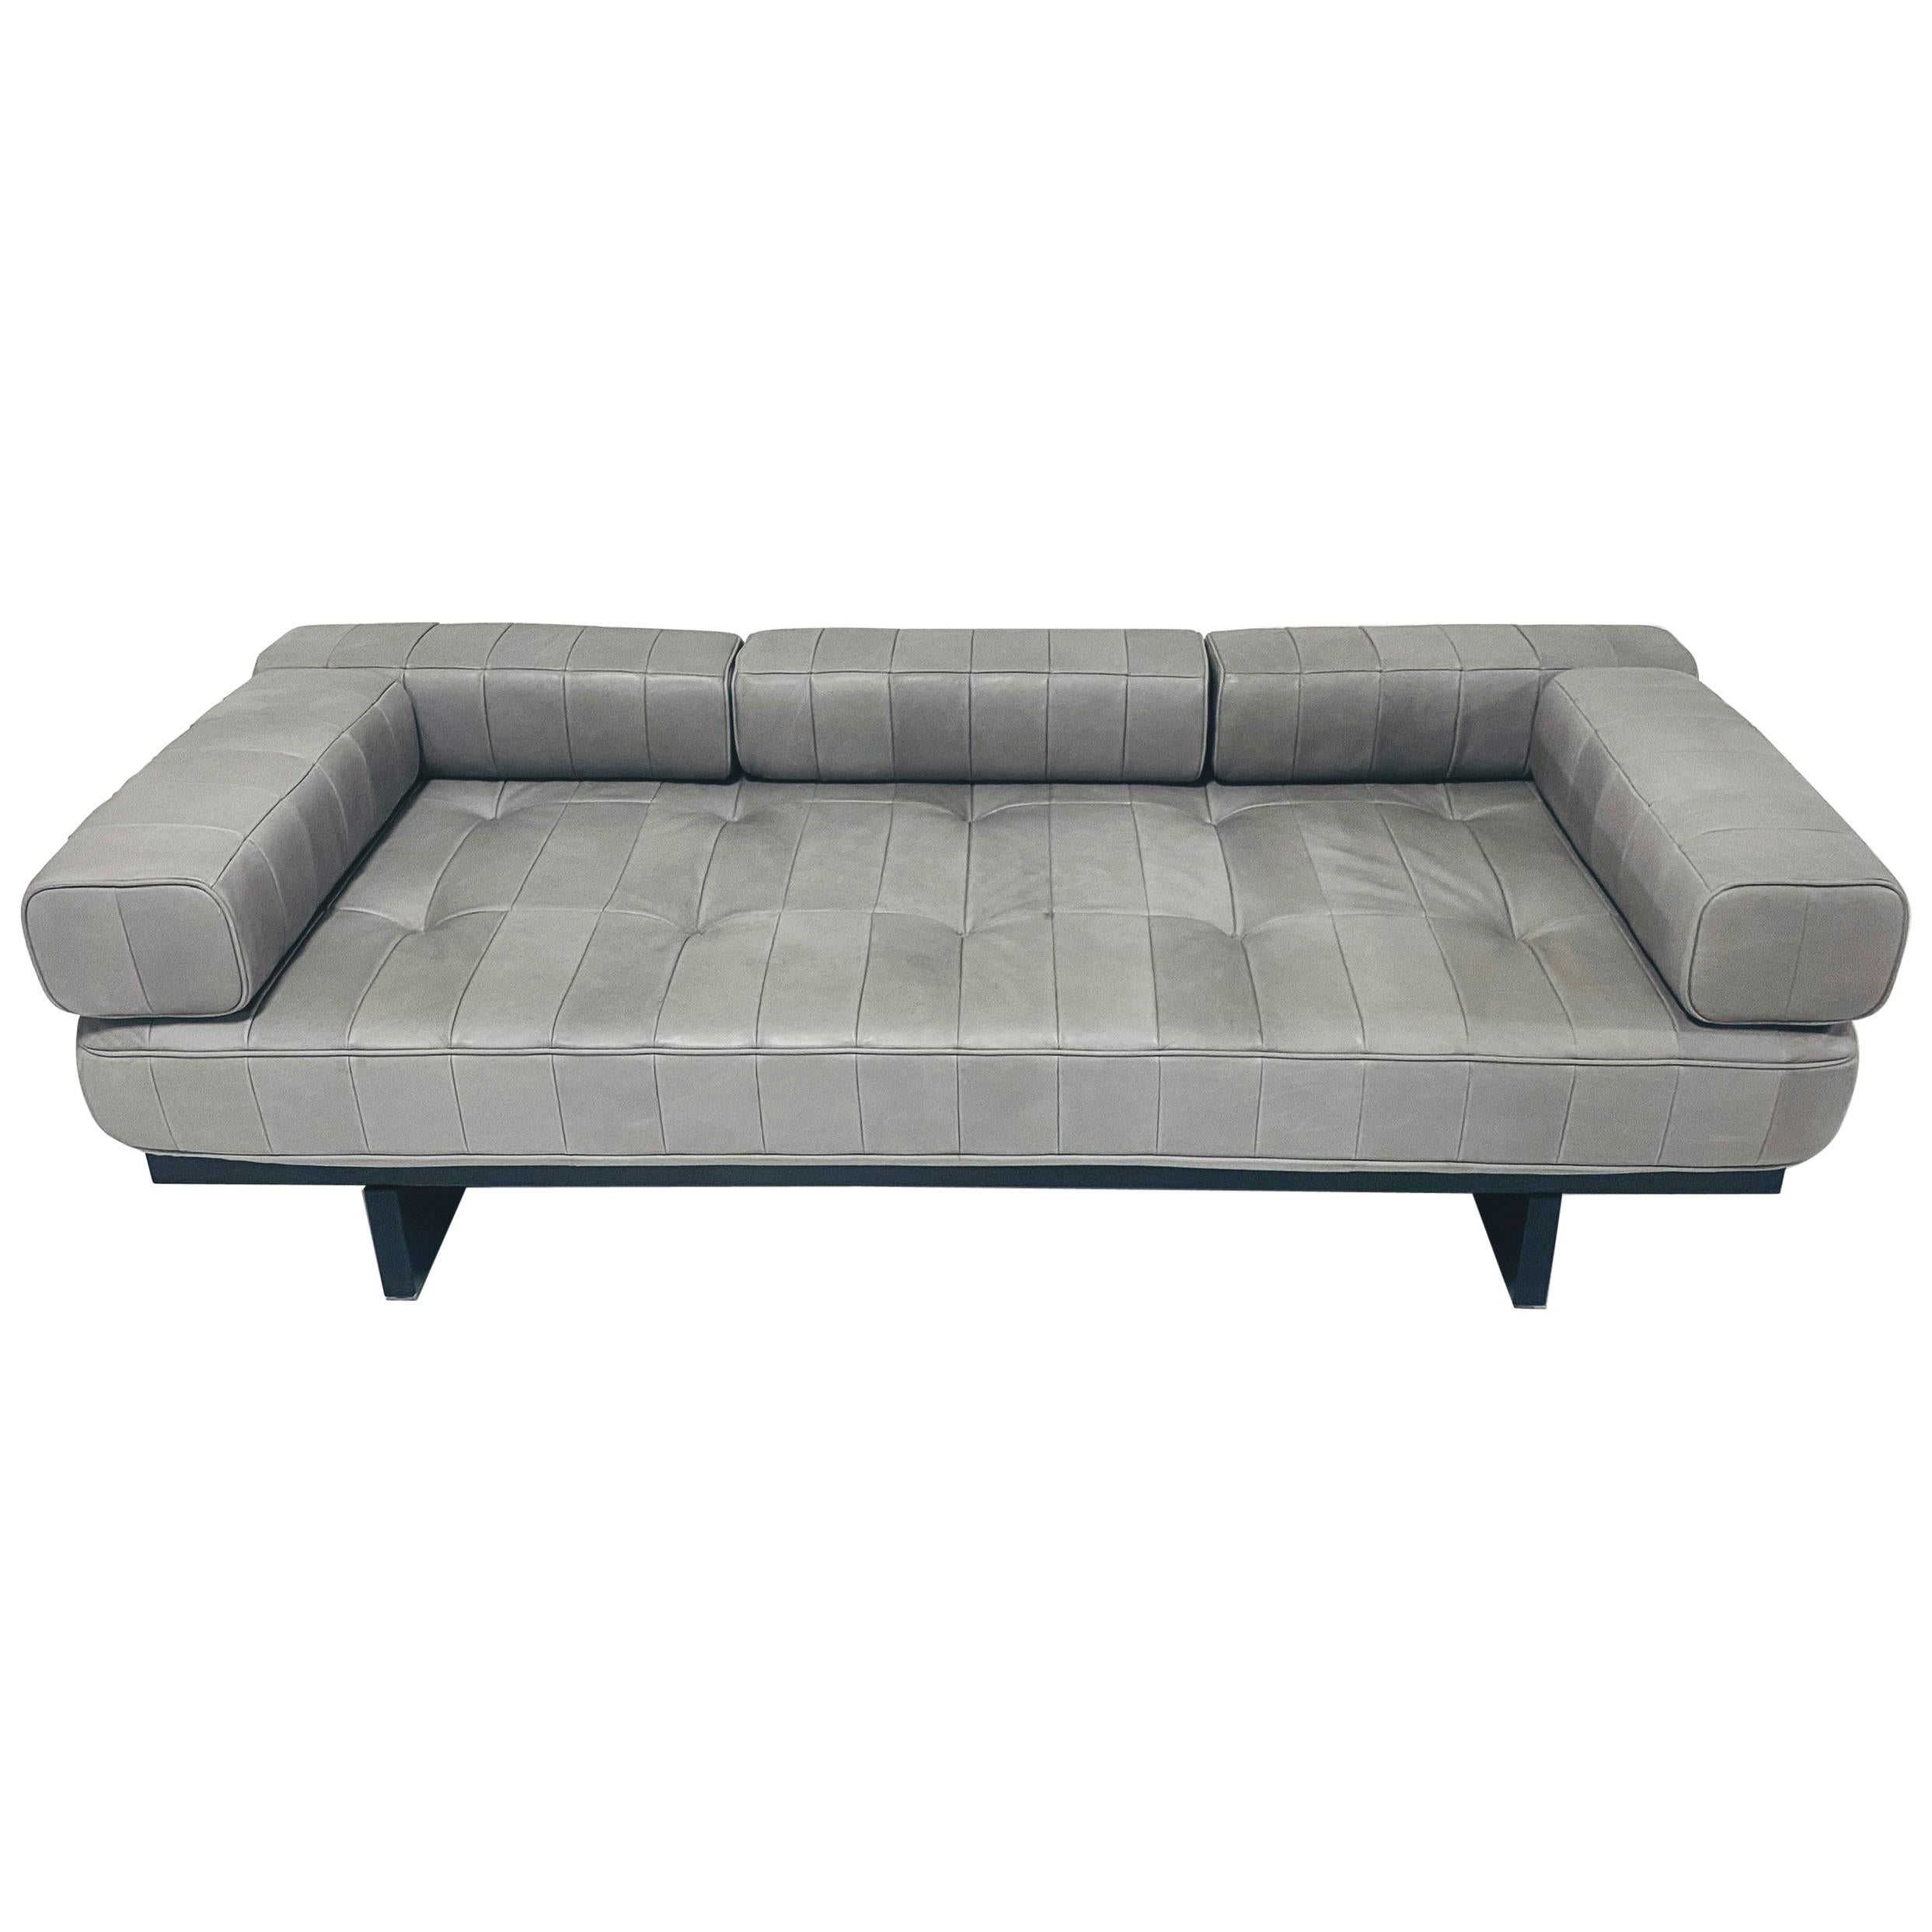 DeSede DS 80 Leather Daybed Sofa